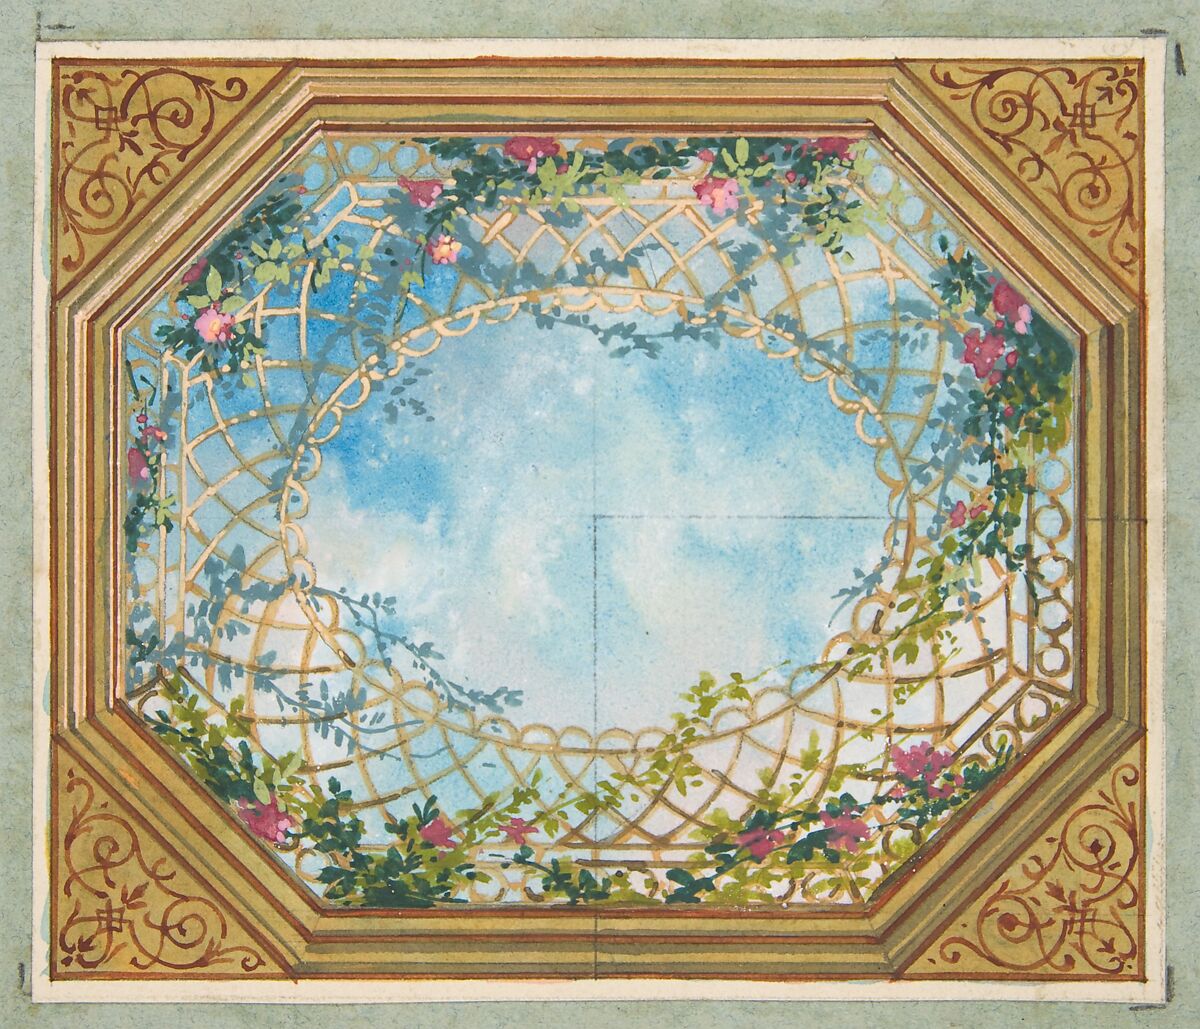 Design for a ceiling painted with clouds, trellises, and roses, Jules-Edmond-Charles Lachaise (French, died 1897), graphite, watercolor, and gouache on wove paper; mounted on blue wove paper 